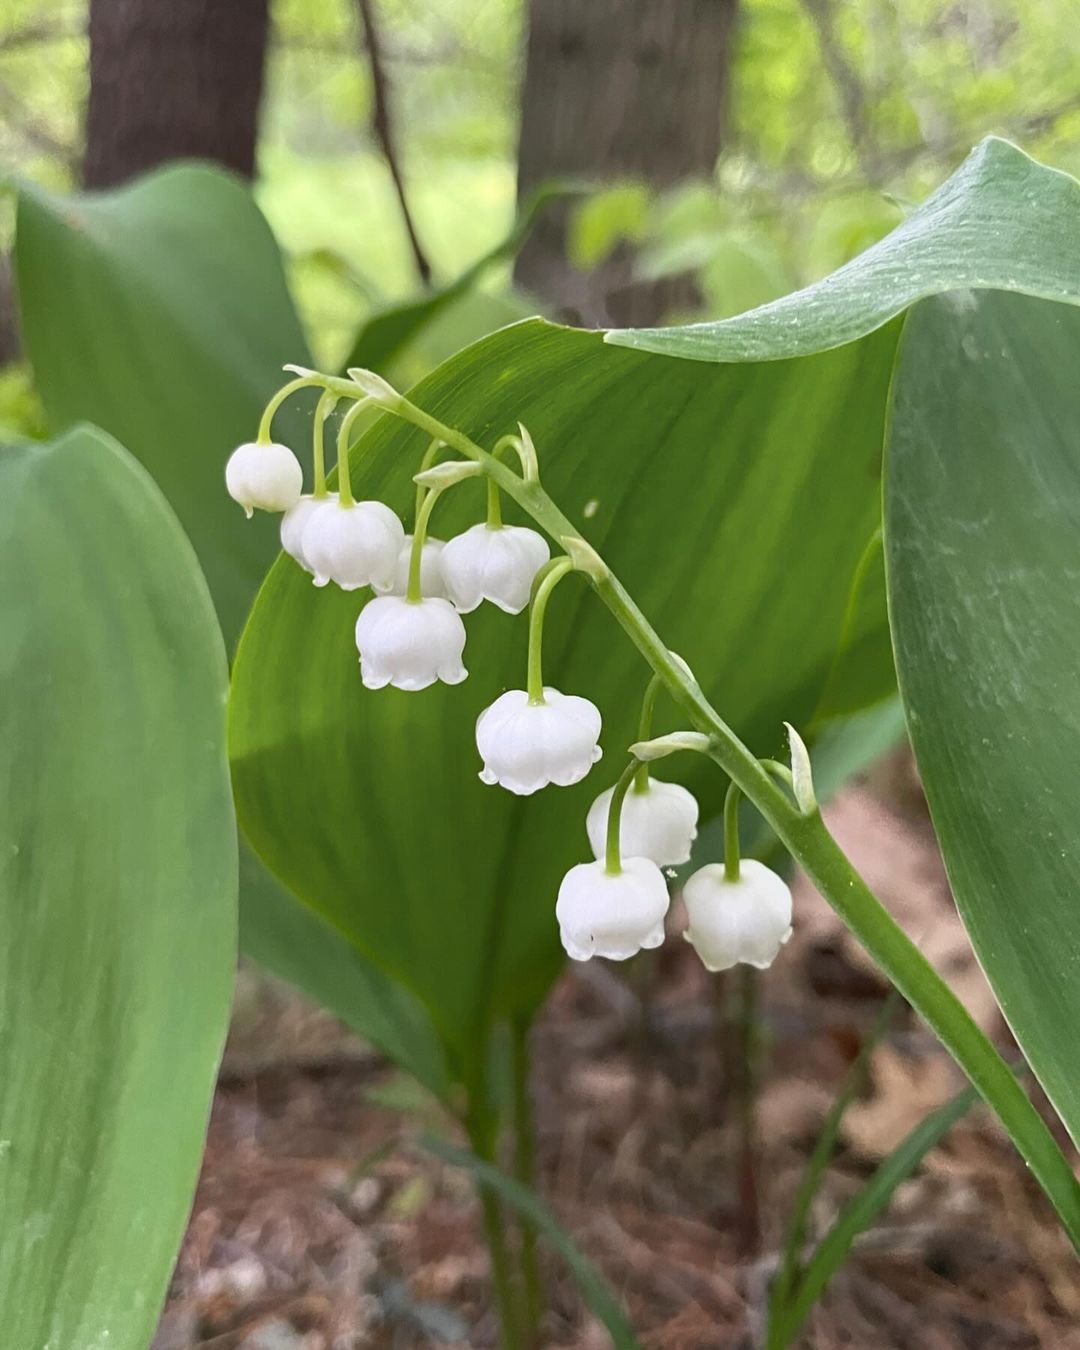 Delicate white bell-shaped flowers of Lily of the Valley plant with green leaves on a blurred background.